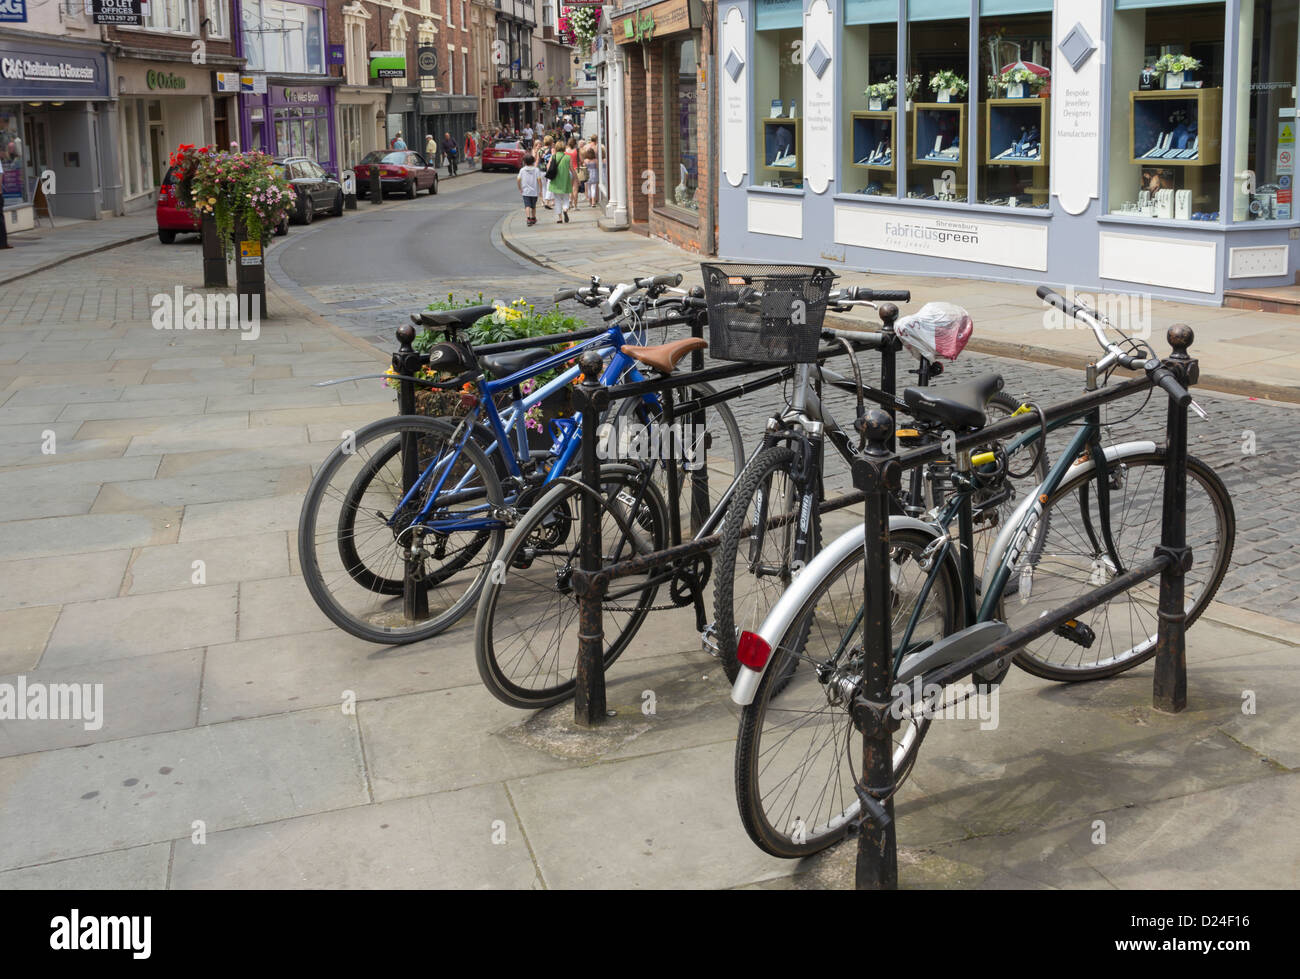 Bicycle stand in front of the Fabricus Green Fine Jewels shop on High Street Shrewsbury. Stock Photo